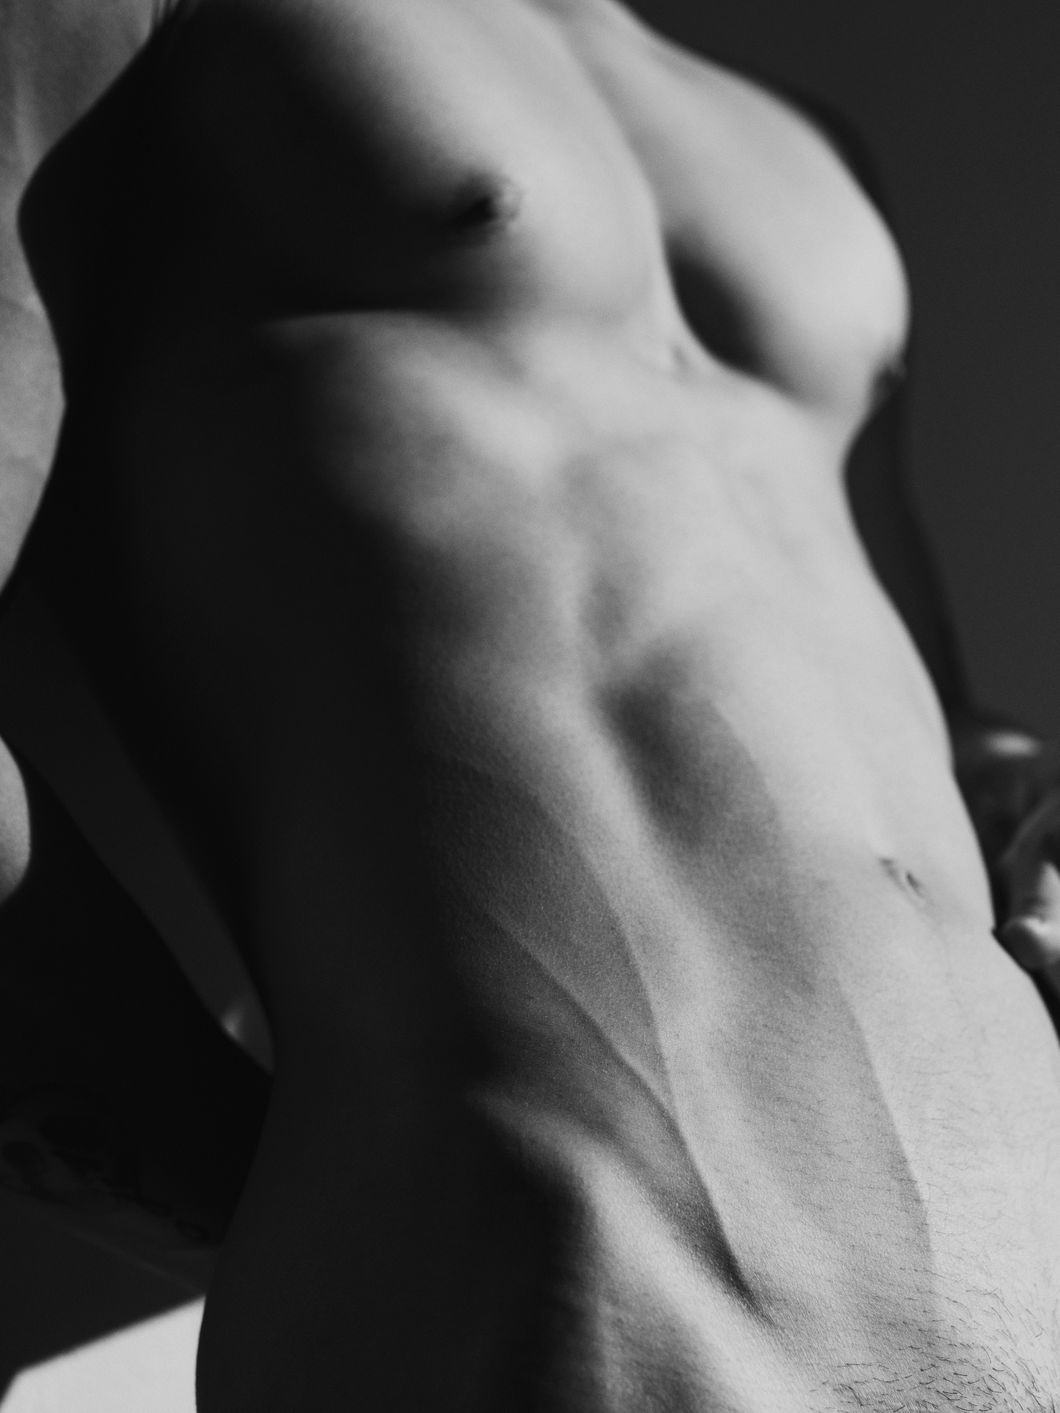 Black and white close-up of a nude male torso, showing chest and belly. The light comes in from the right, creating a shadow across the torso on the left. © Ricardo Nagaoka